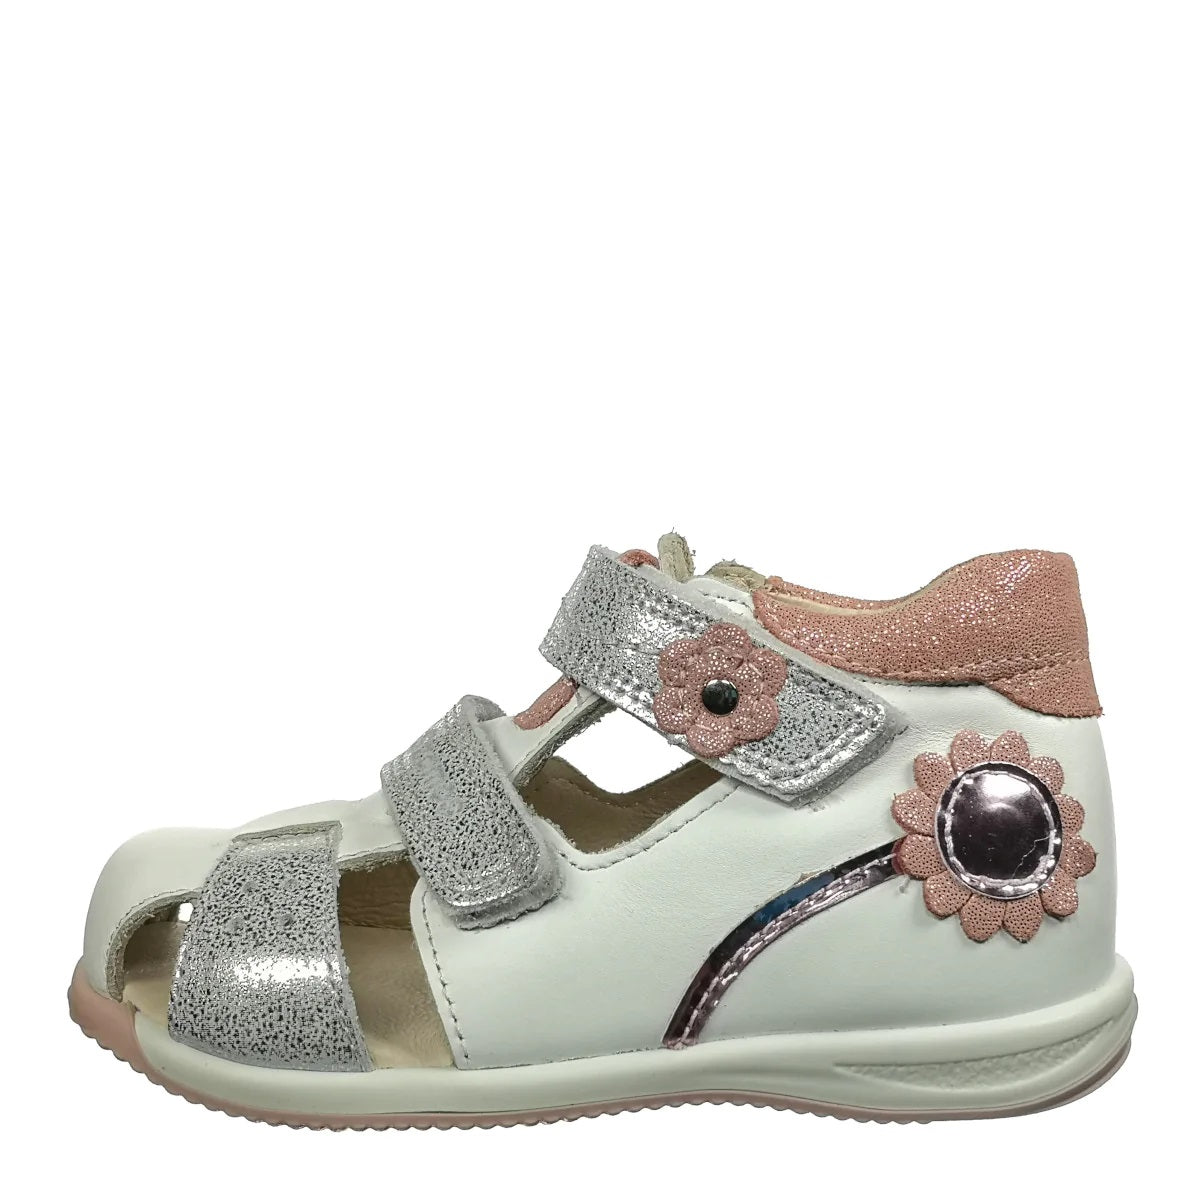 Premium quality sandals made from 100% genuine leather lining and upper, white color and flower pattern with silver glitter double velcro strap. This Szamos Kids product meets the highest expectations of healthy and comfortable kids shoes. The exceptional comfort these shoes provide assure the well-being and happiness of your child.